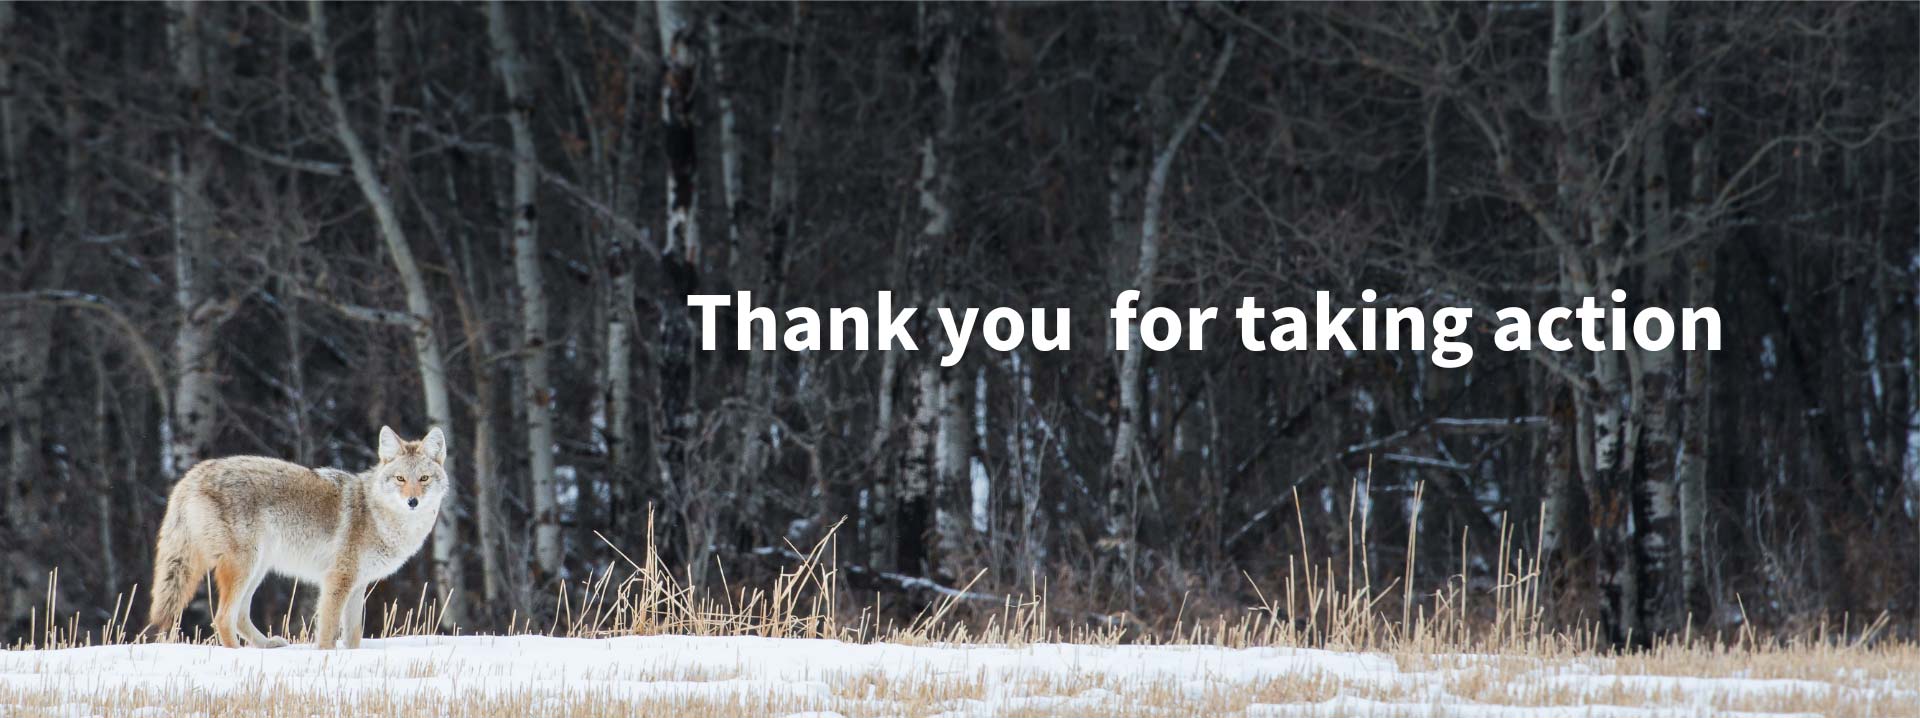 Thank you for taking action!